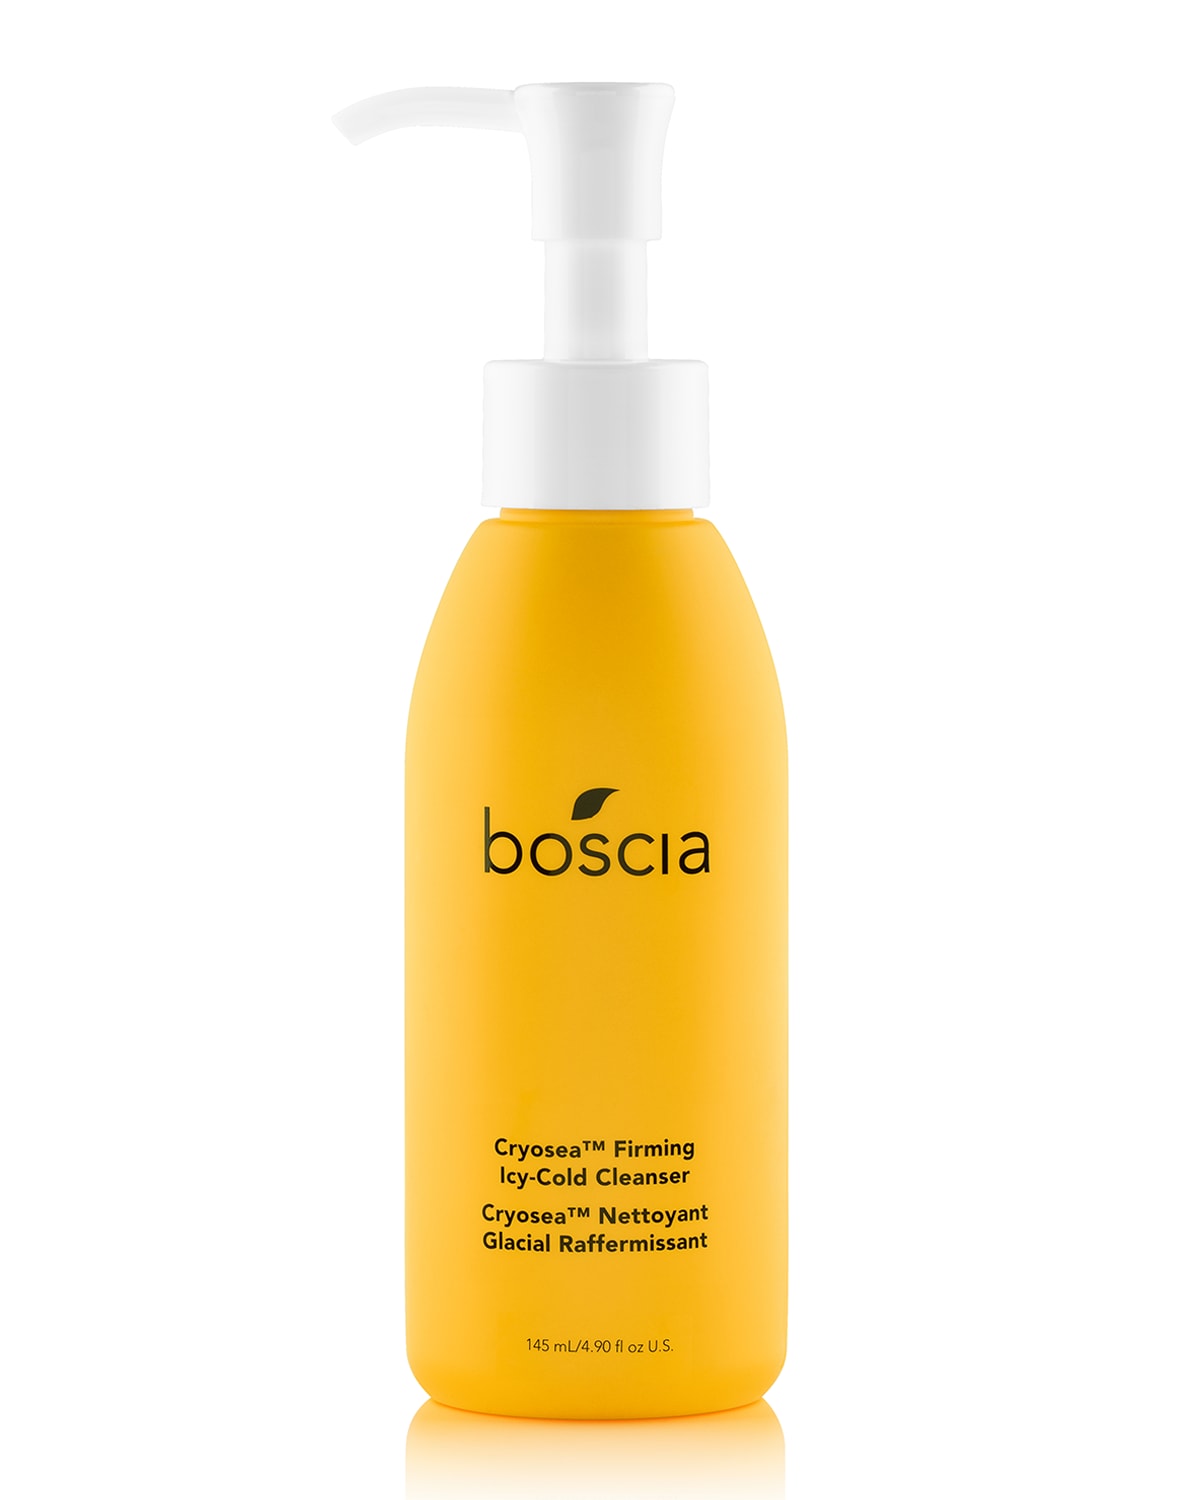 boscia 4.9 oz. Cryosea Firming Icy-Cold Cleanser